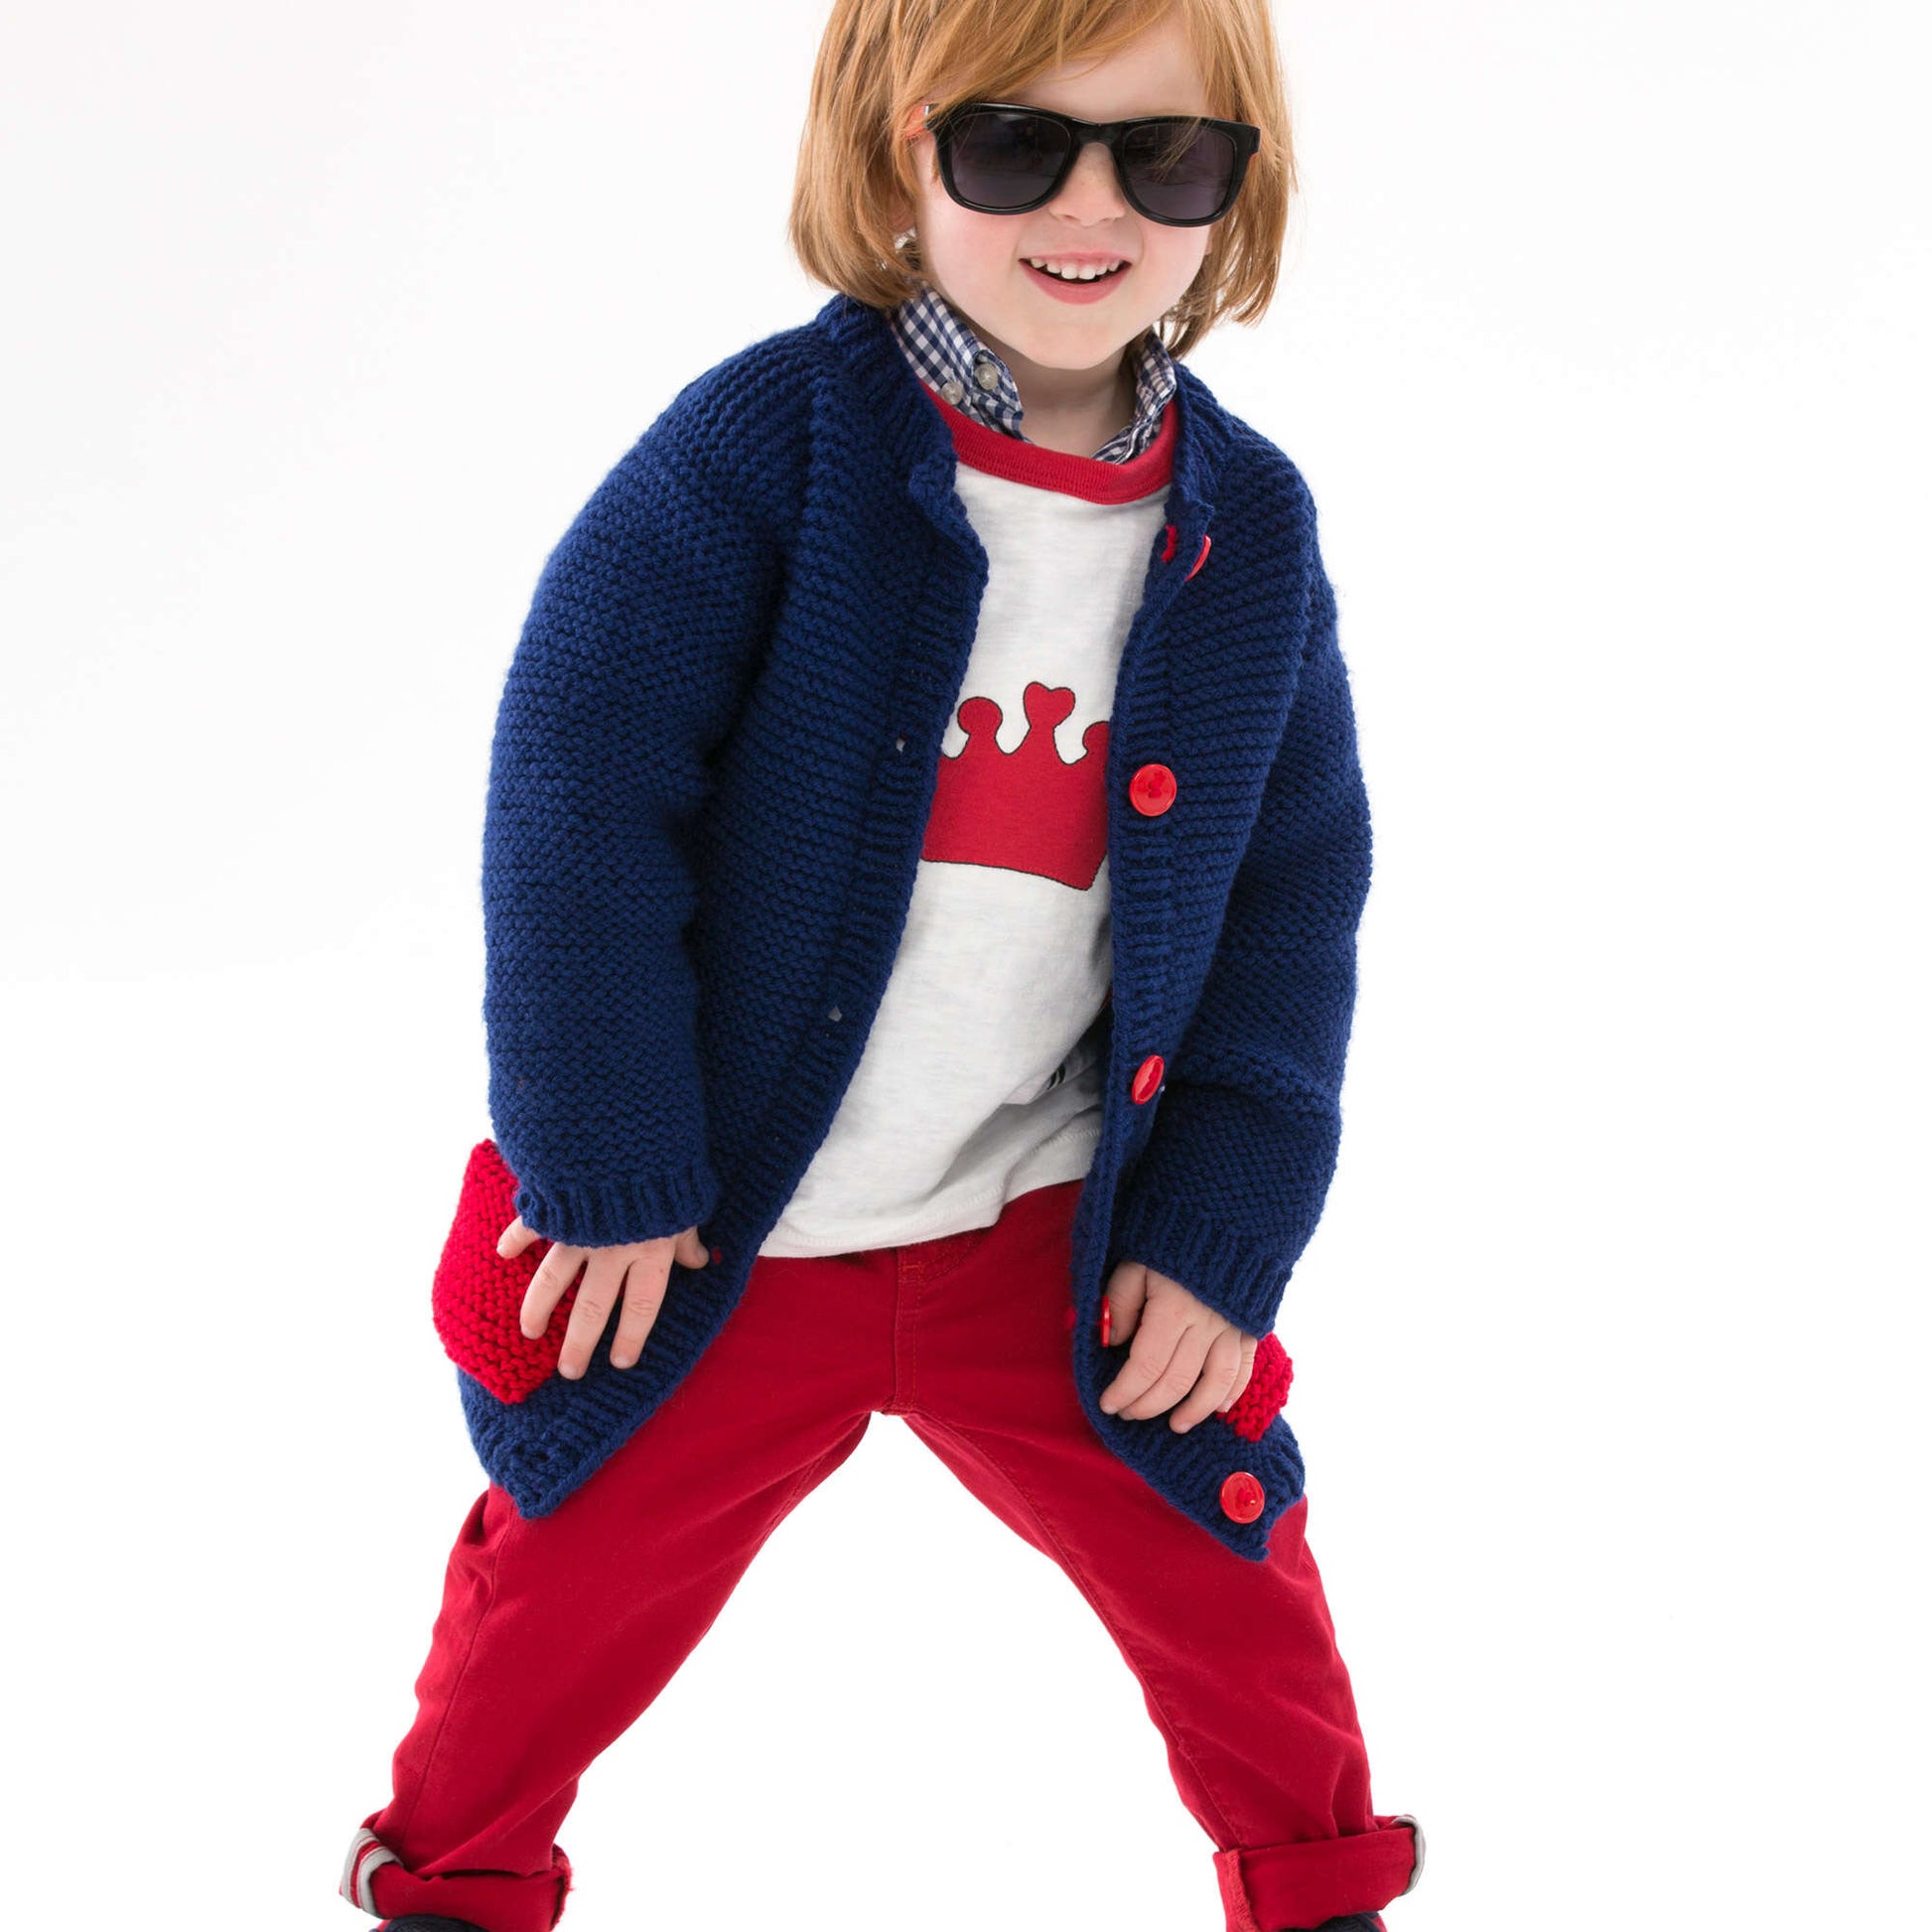 Free Red Heart Too Cool Boy's Knit Cardigan Pattern